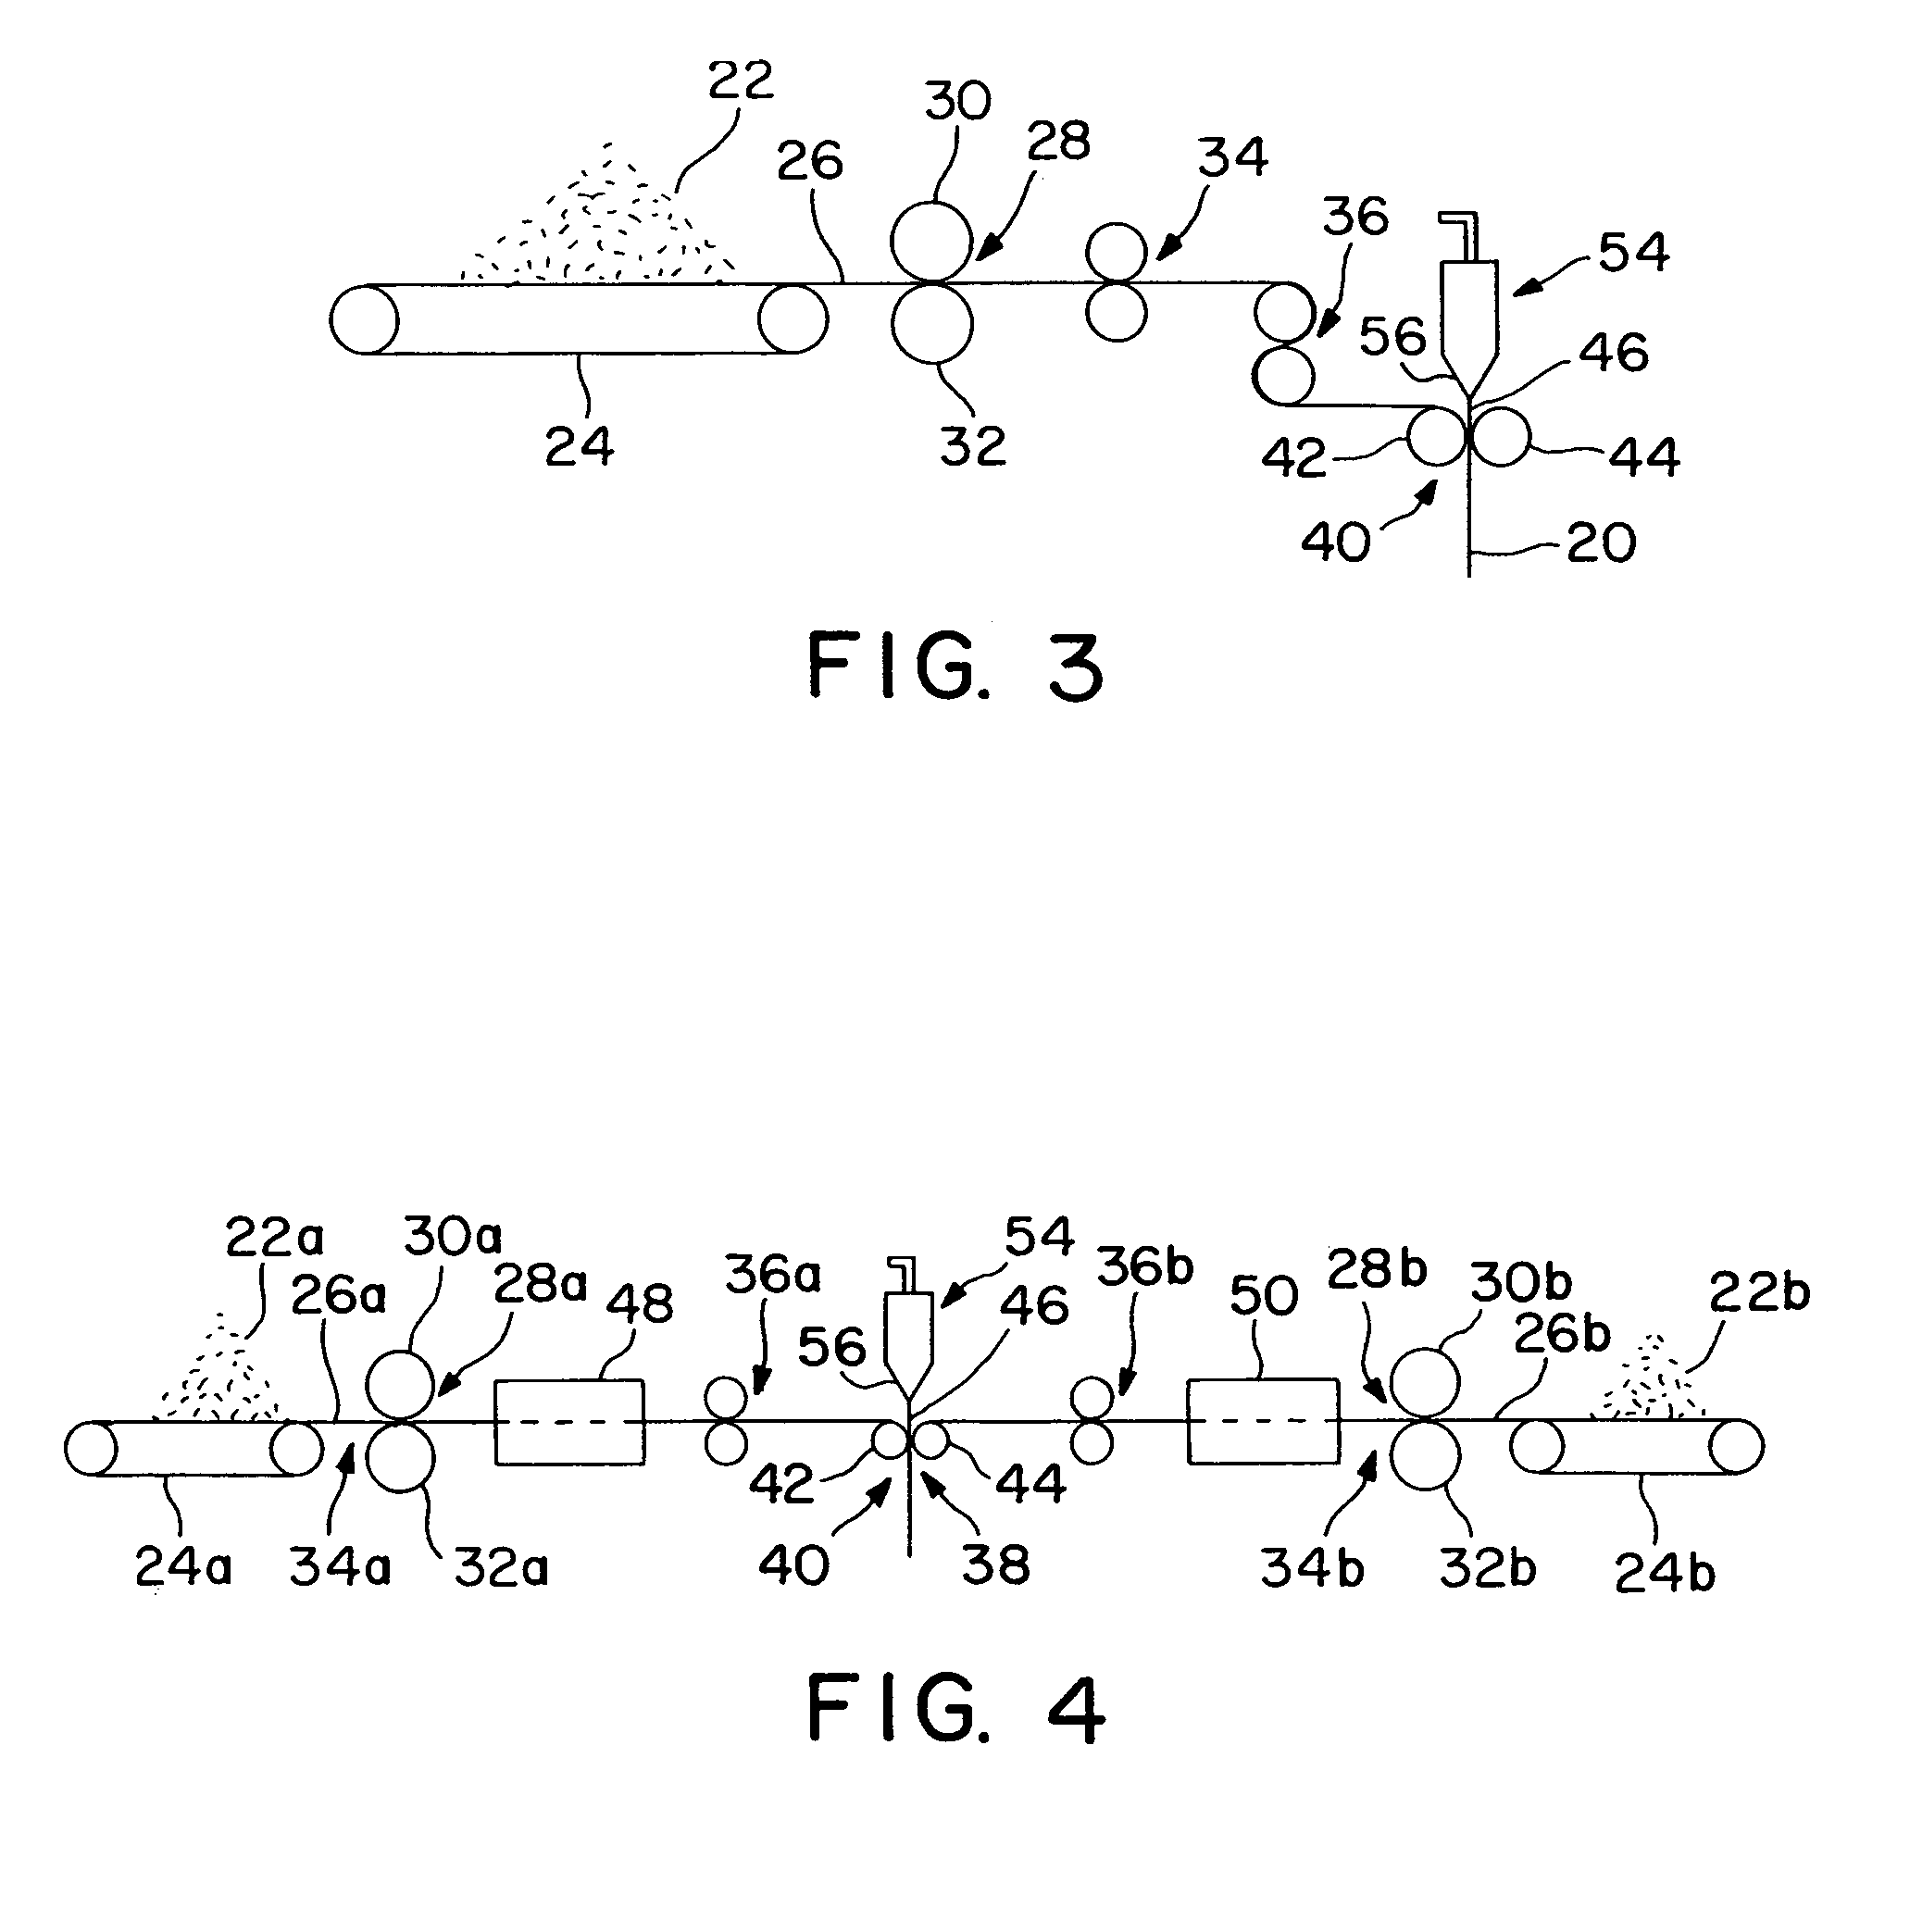 One-step necked-bonded laminate process and apparatus